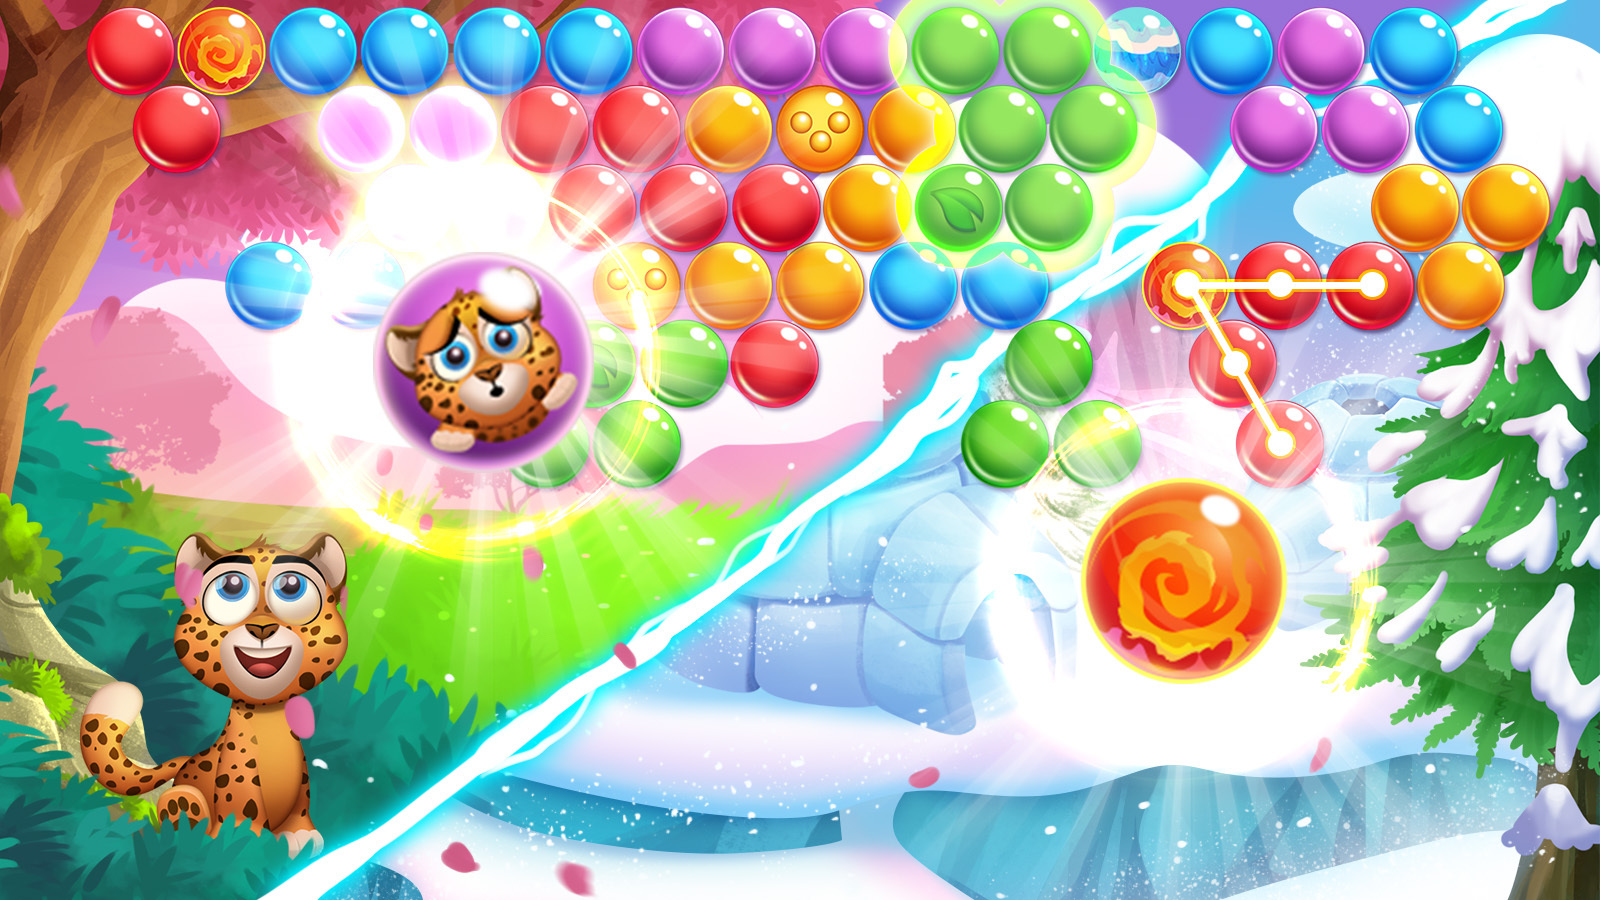 How to Install and Play Bubble Shooter Fashion on PC with BlueStacks